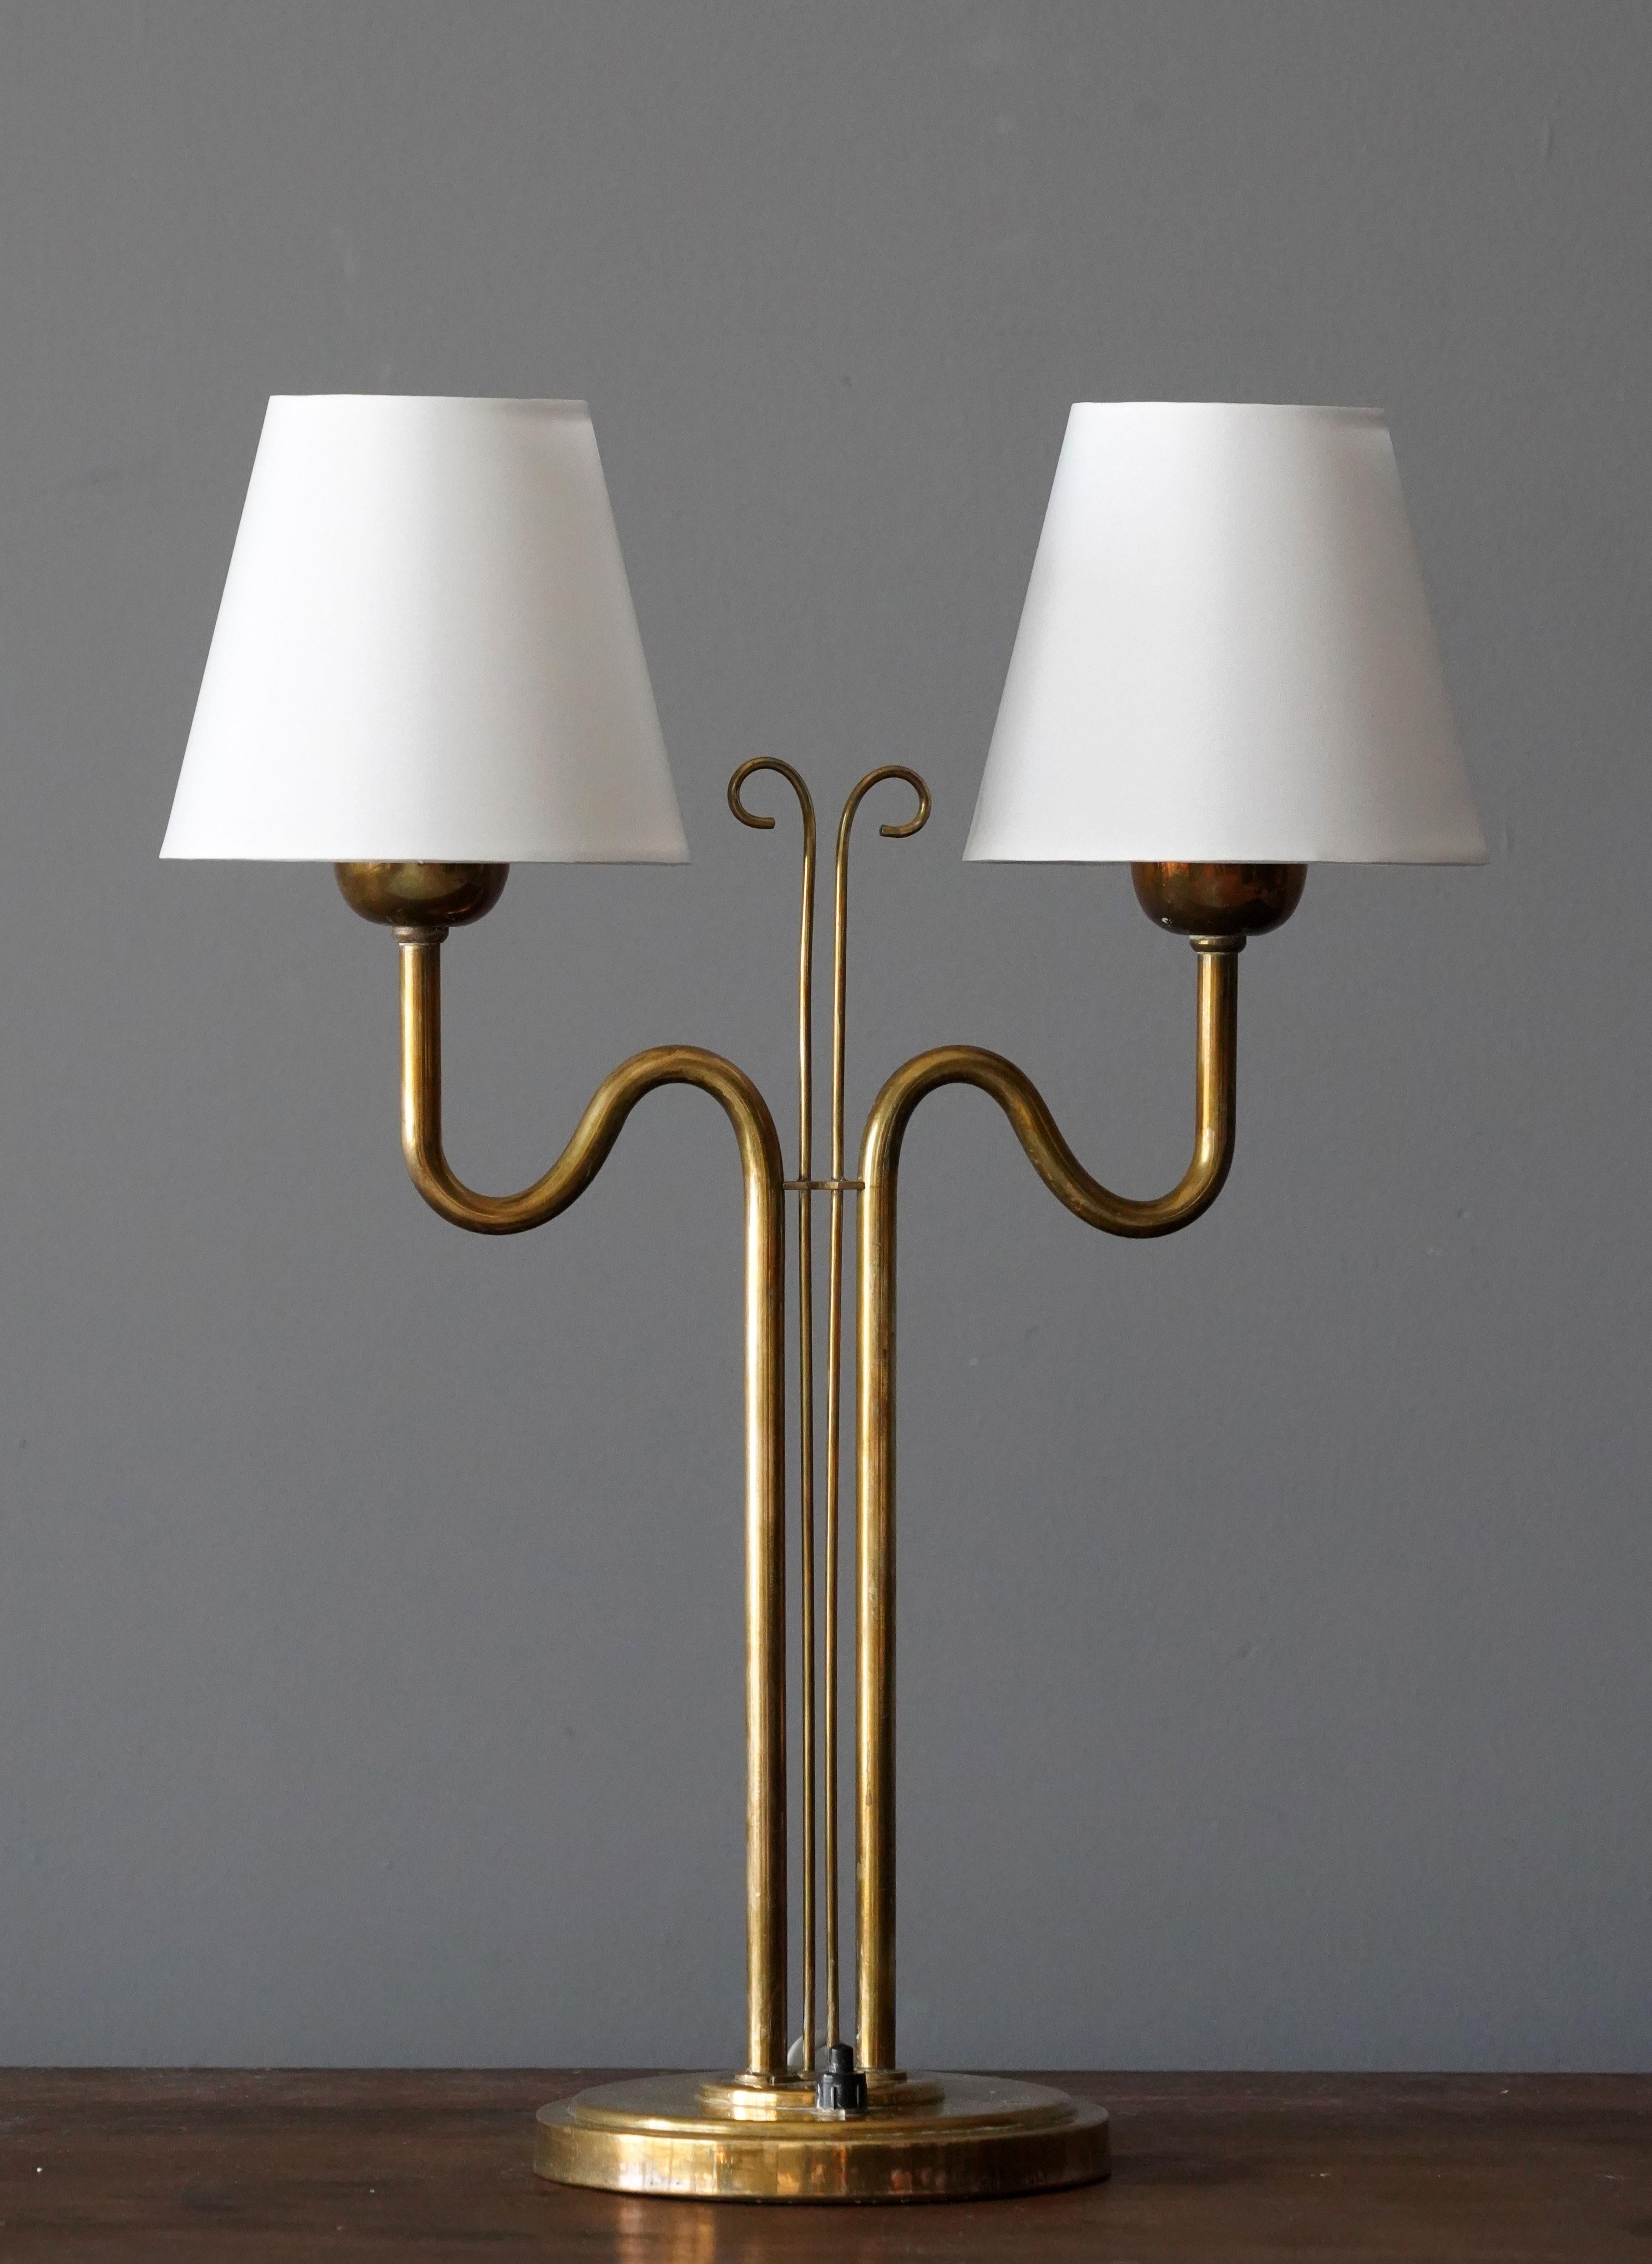 A table lamp or desk light. In brass. Produced by Böhlmarks, Sweden, 1940s.

Other designers of the period include Josef Frank, Paavo Tynell, Hans Bergström, Böhlmarks, and Jean Royère.